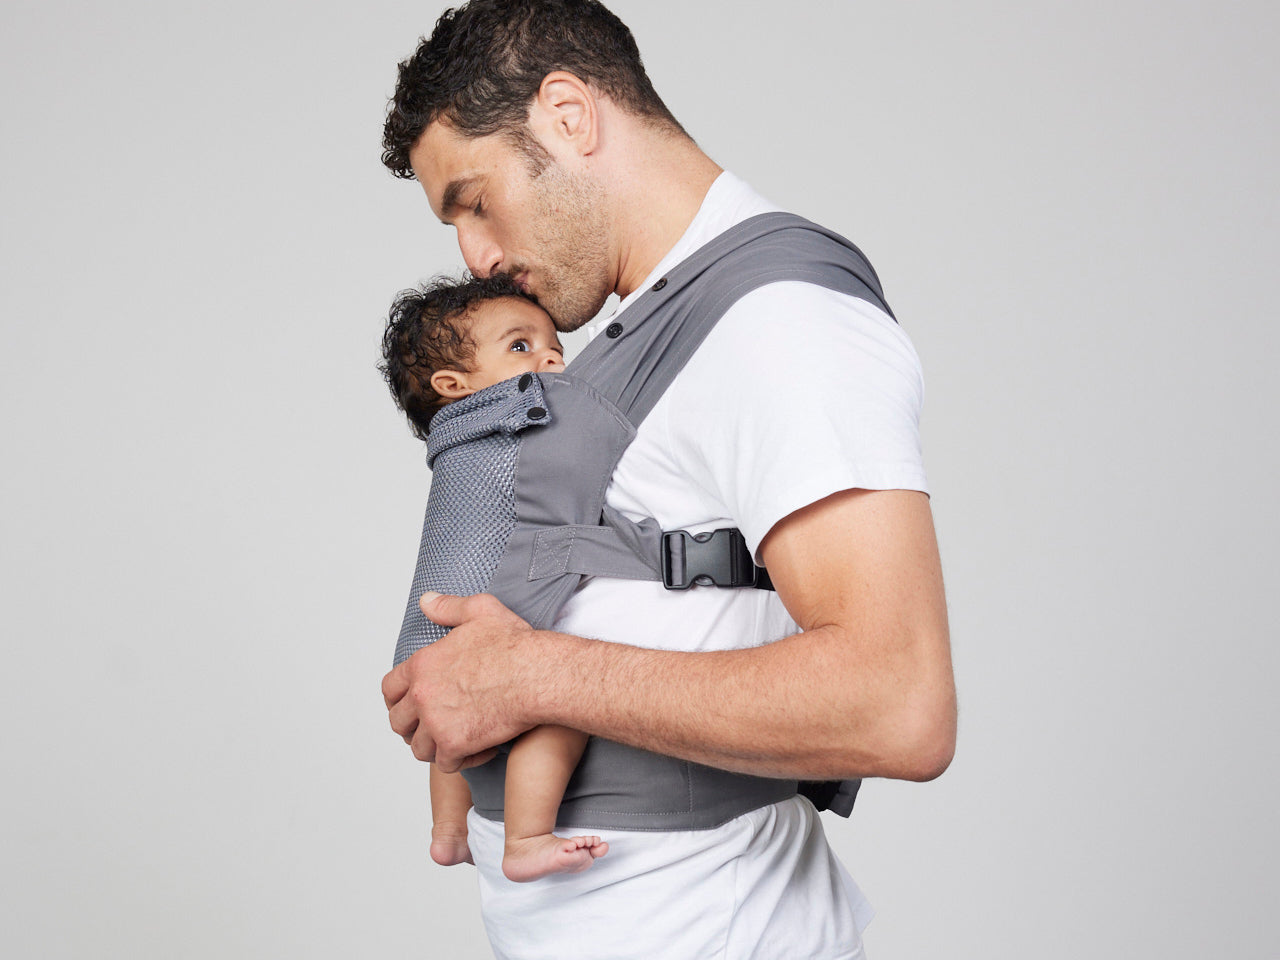 Man kisses the head of baby he is carrying in the Izmi Breeze Baby Carrier